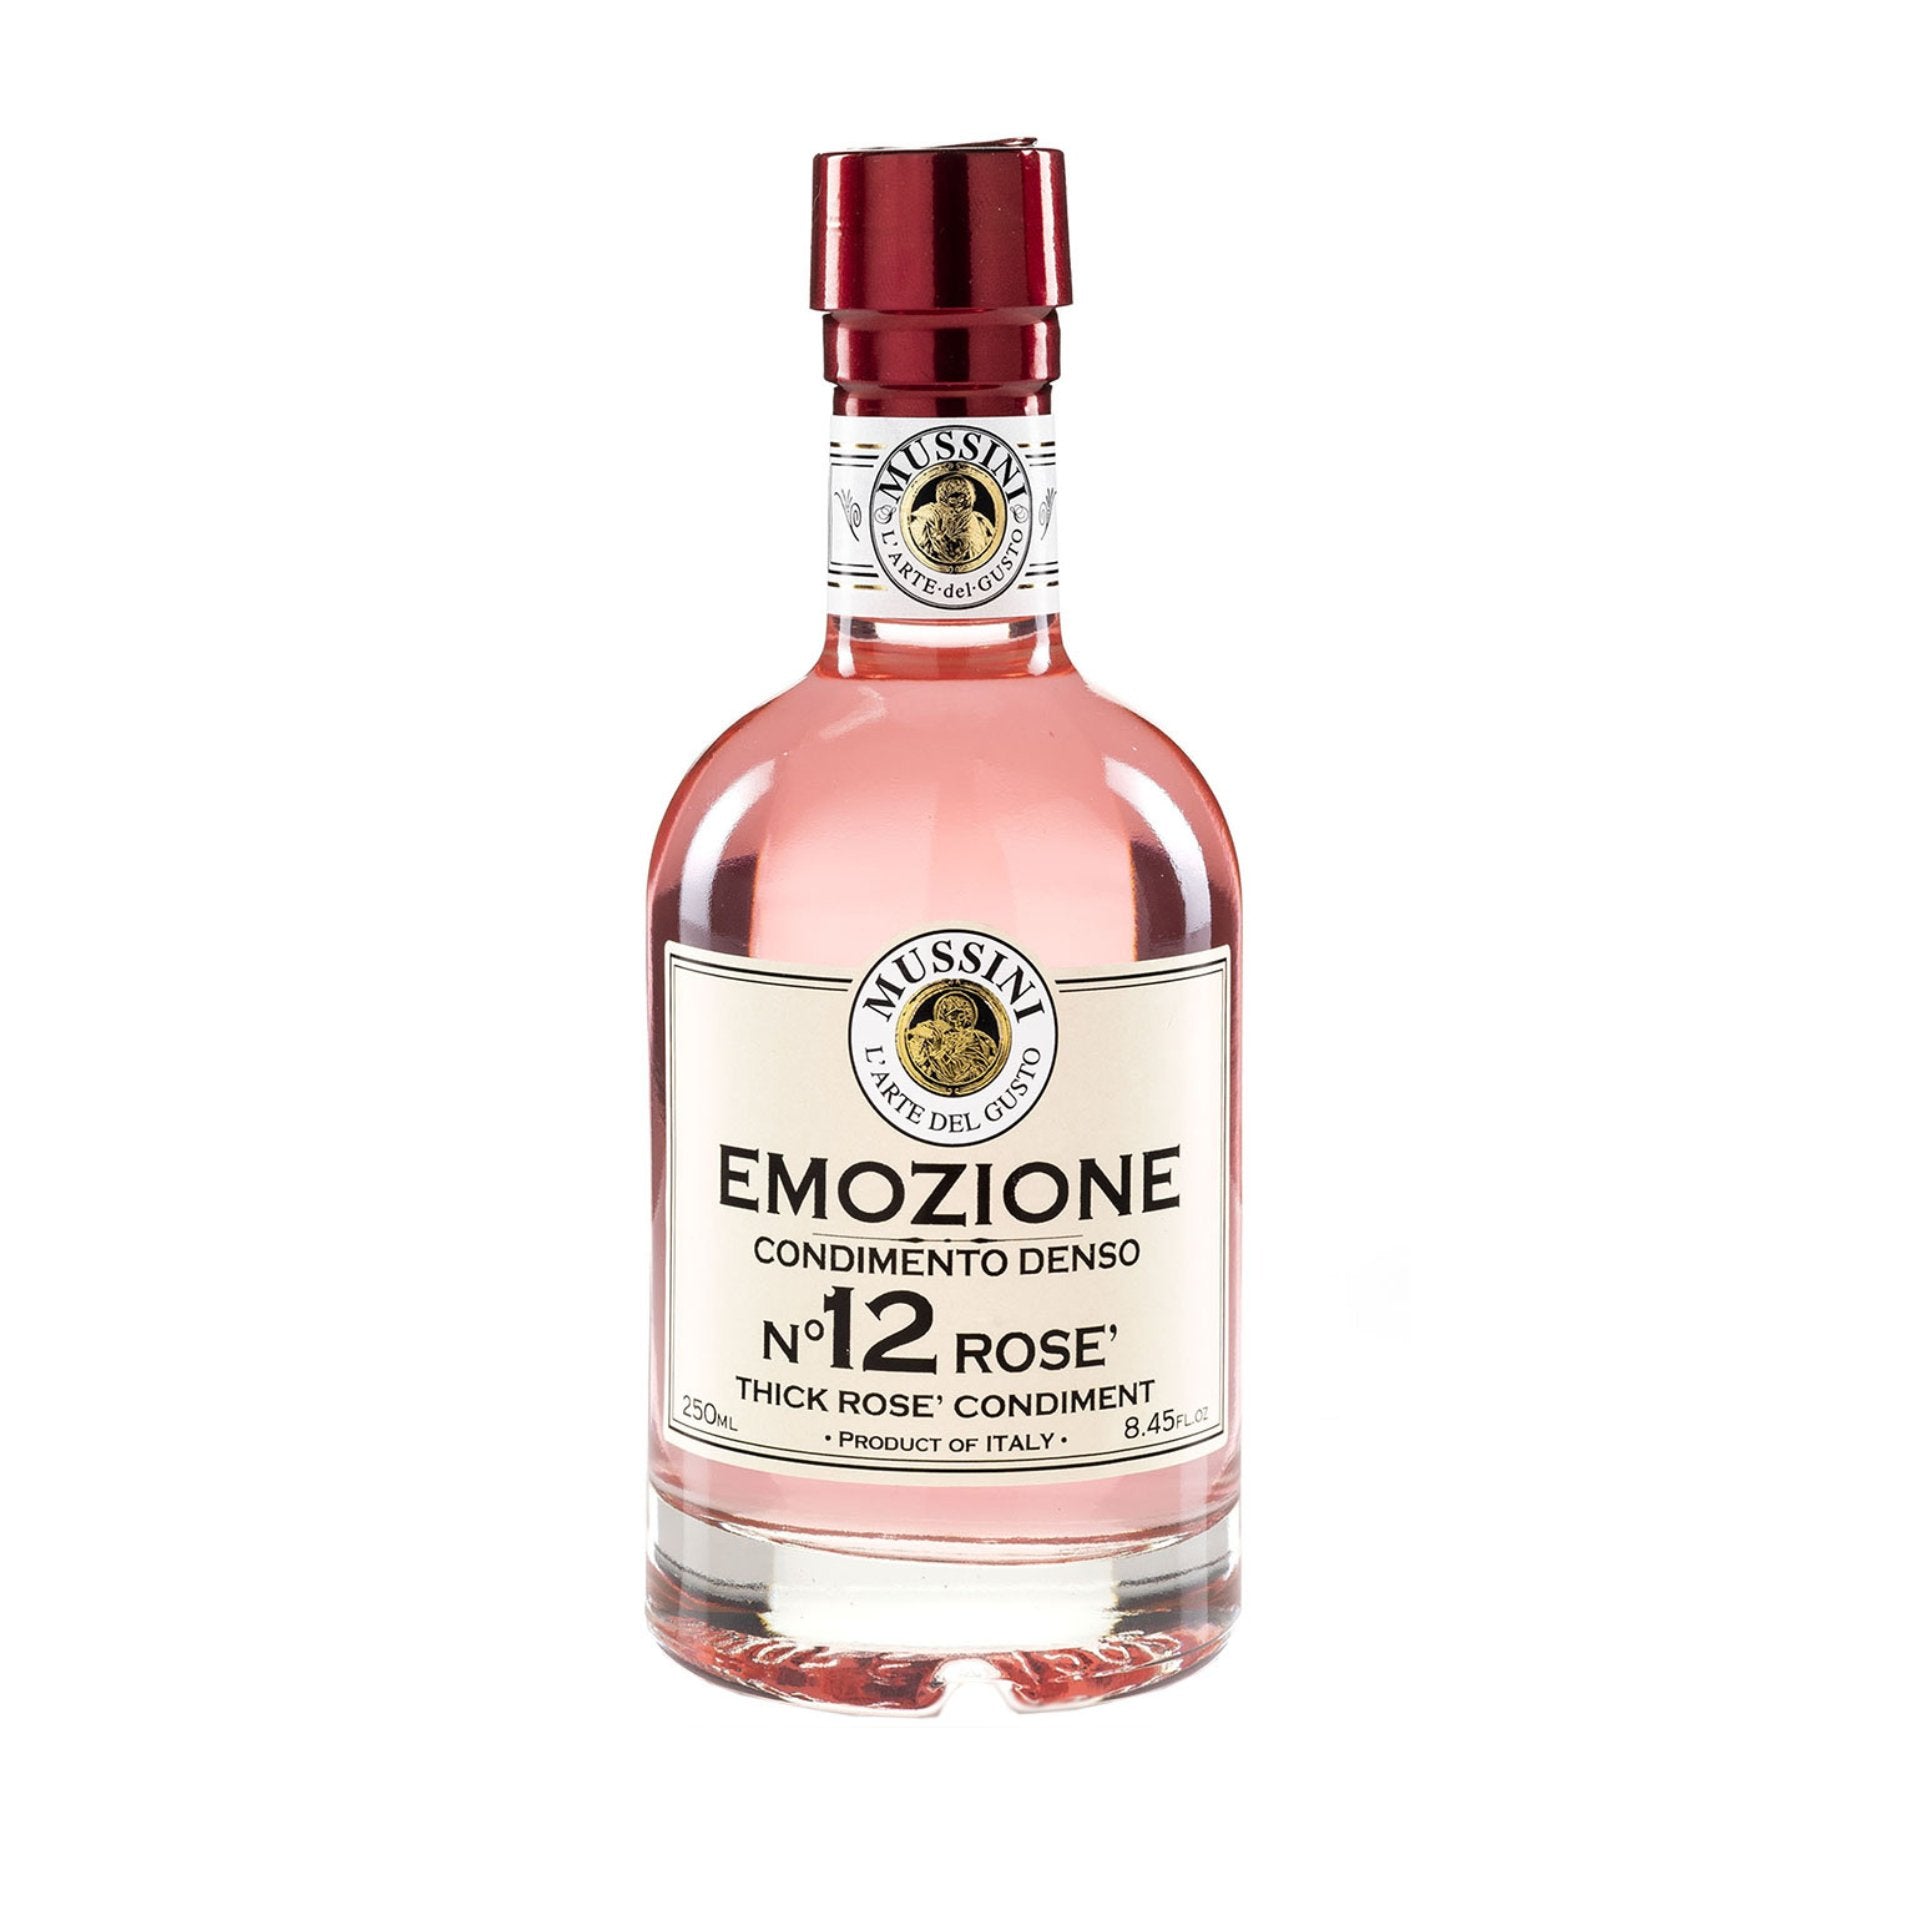 Mussini Rose' Wine Vinegar 250ml  | Imported and distributed in the UK by Just Gourmet Foods